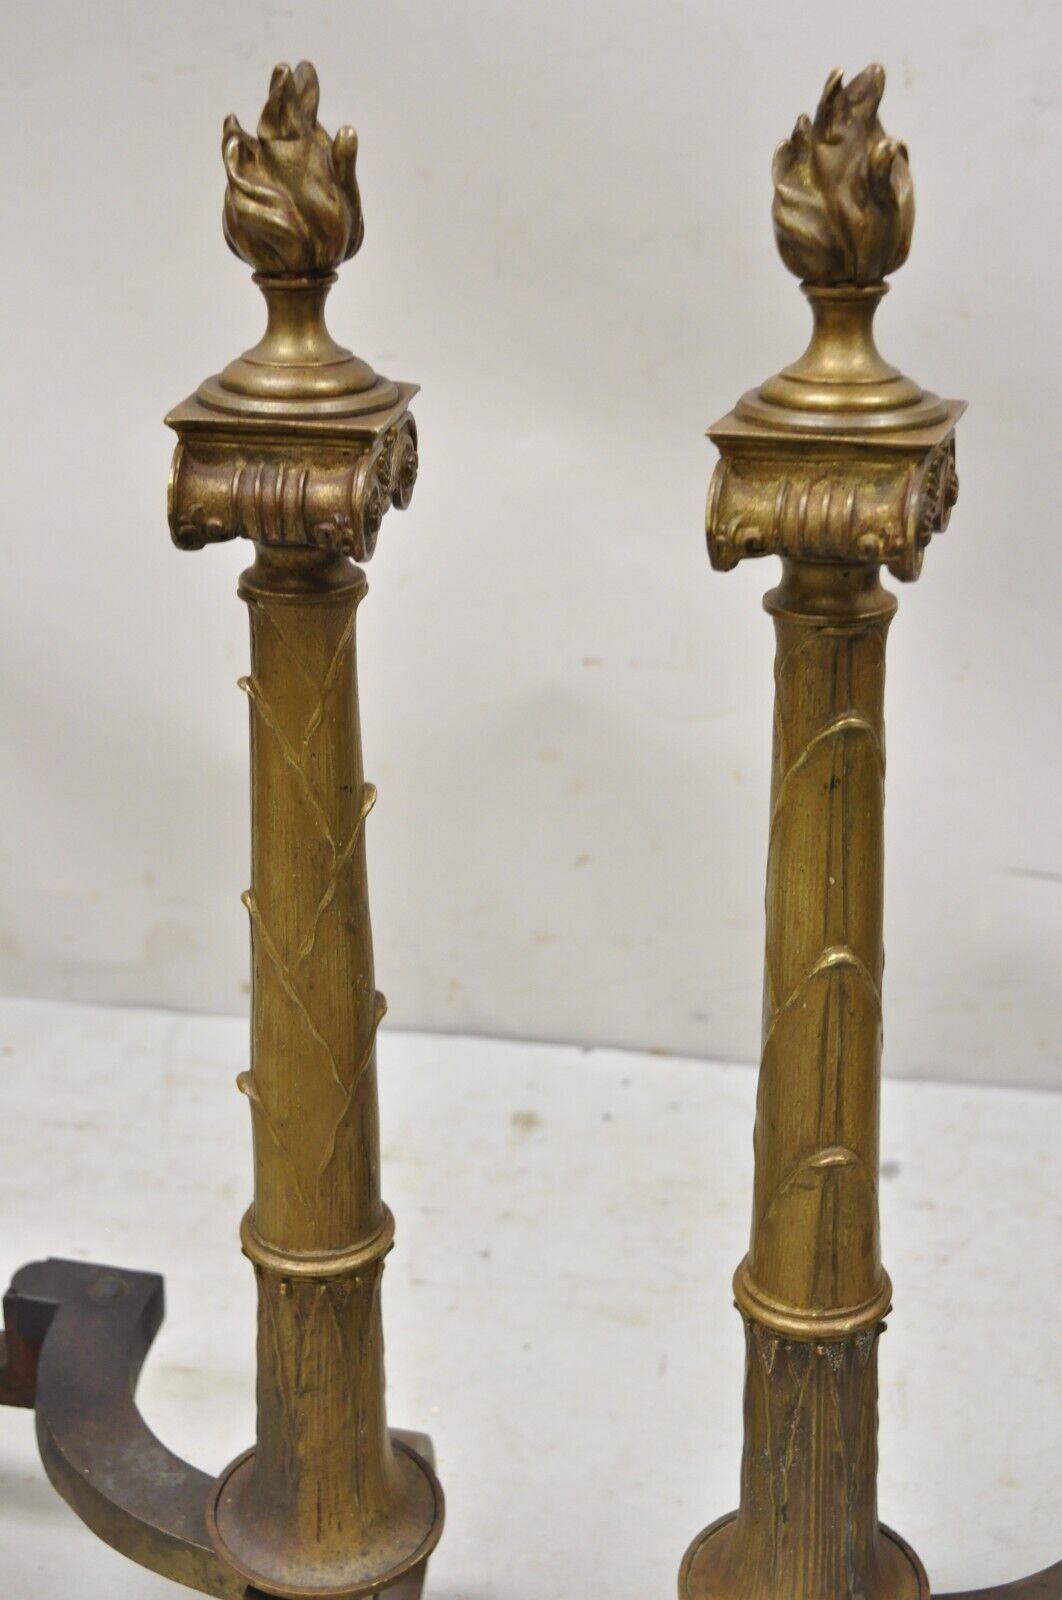 20th Century Antique French Empire Renaissance Style Torch Flame Finial Bronze Andirons Pair